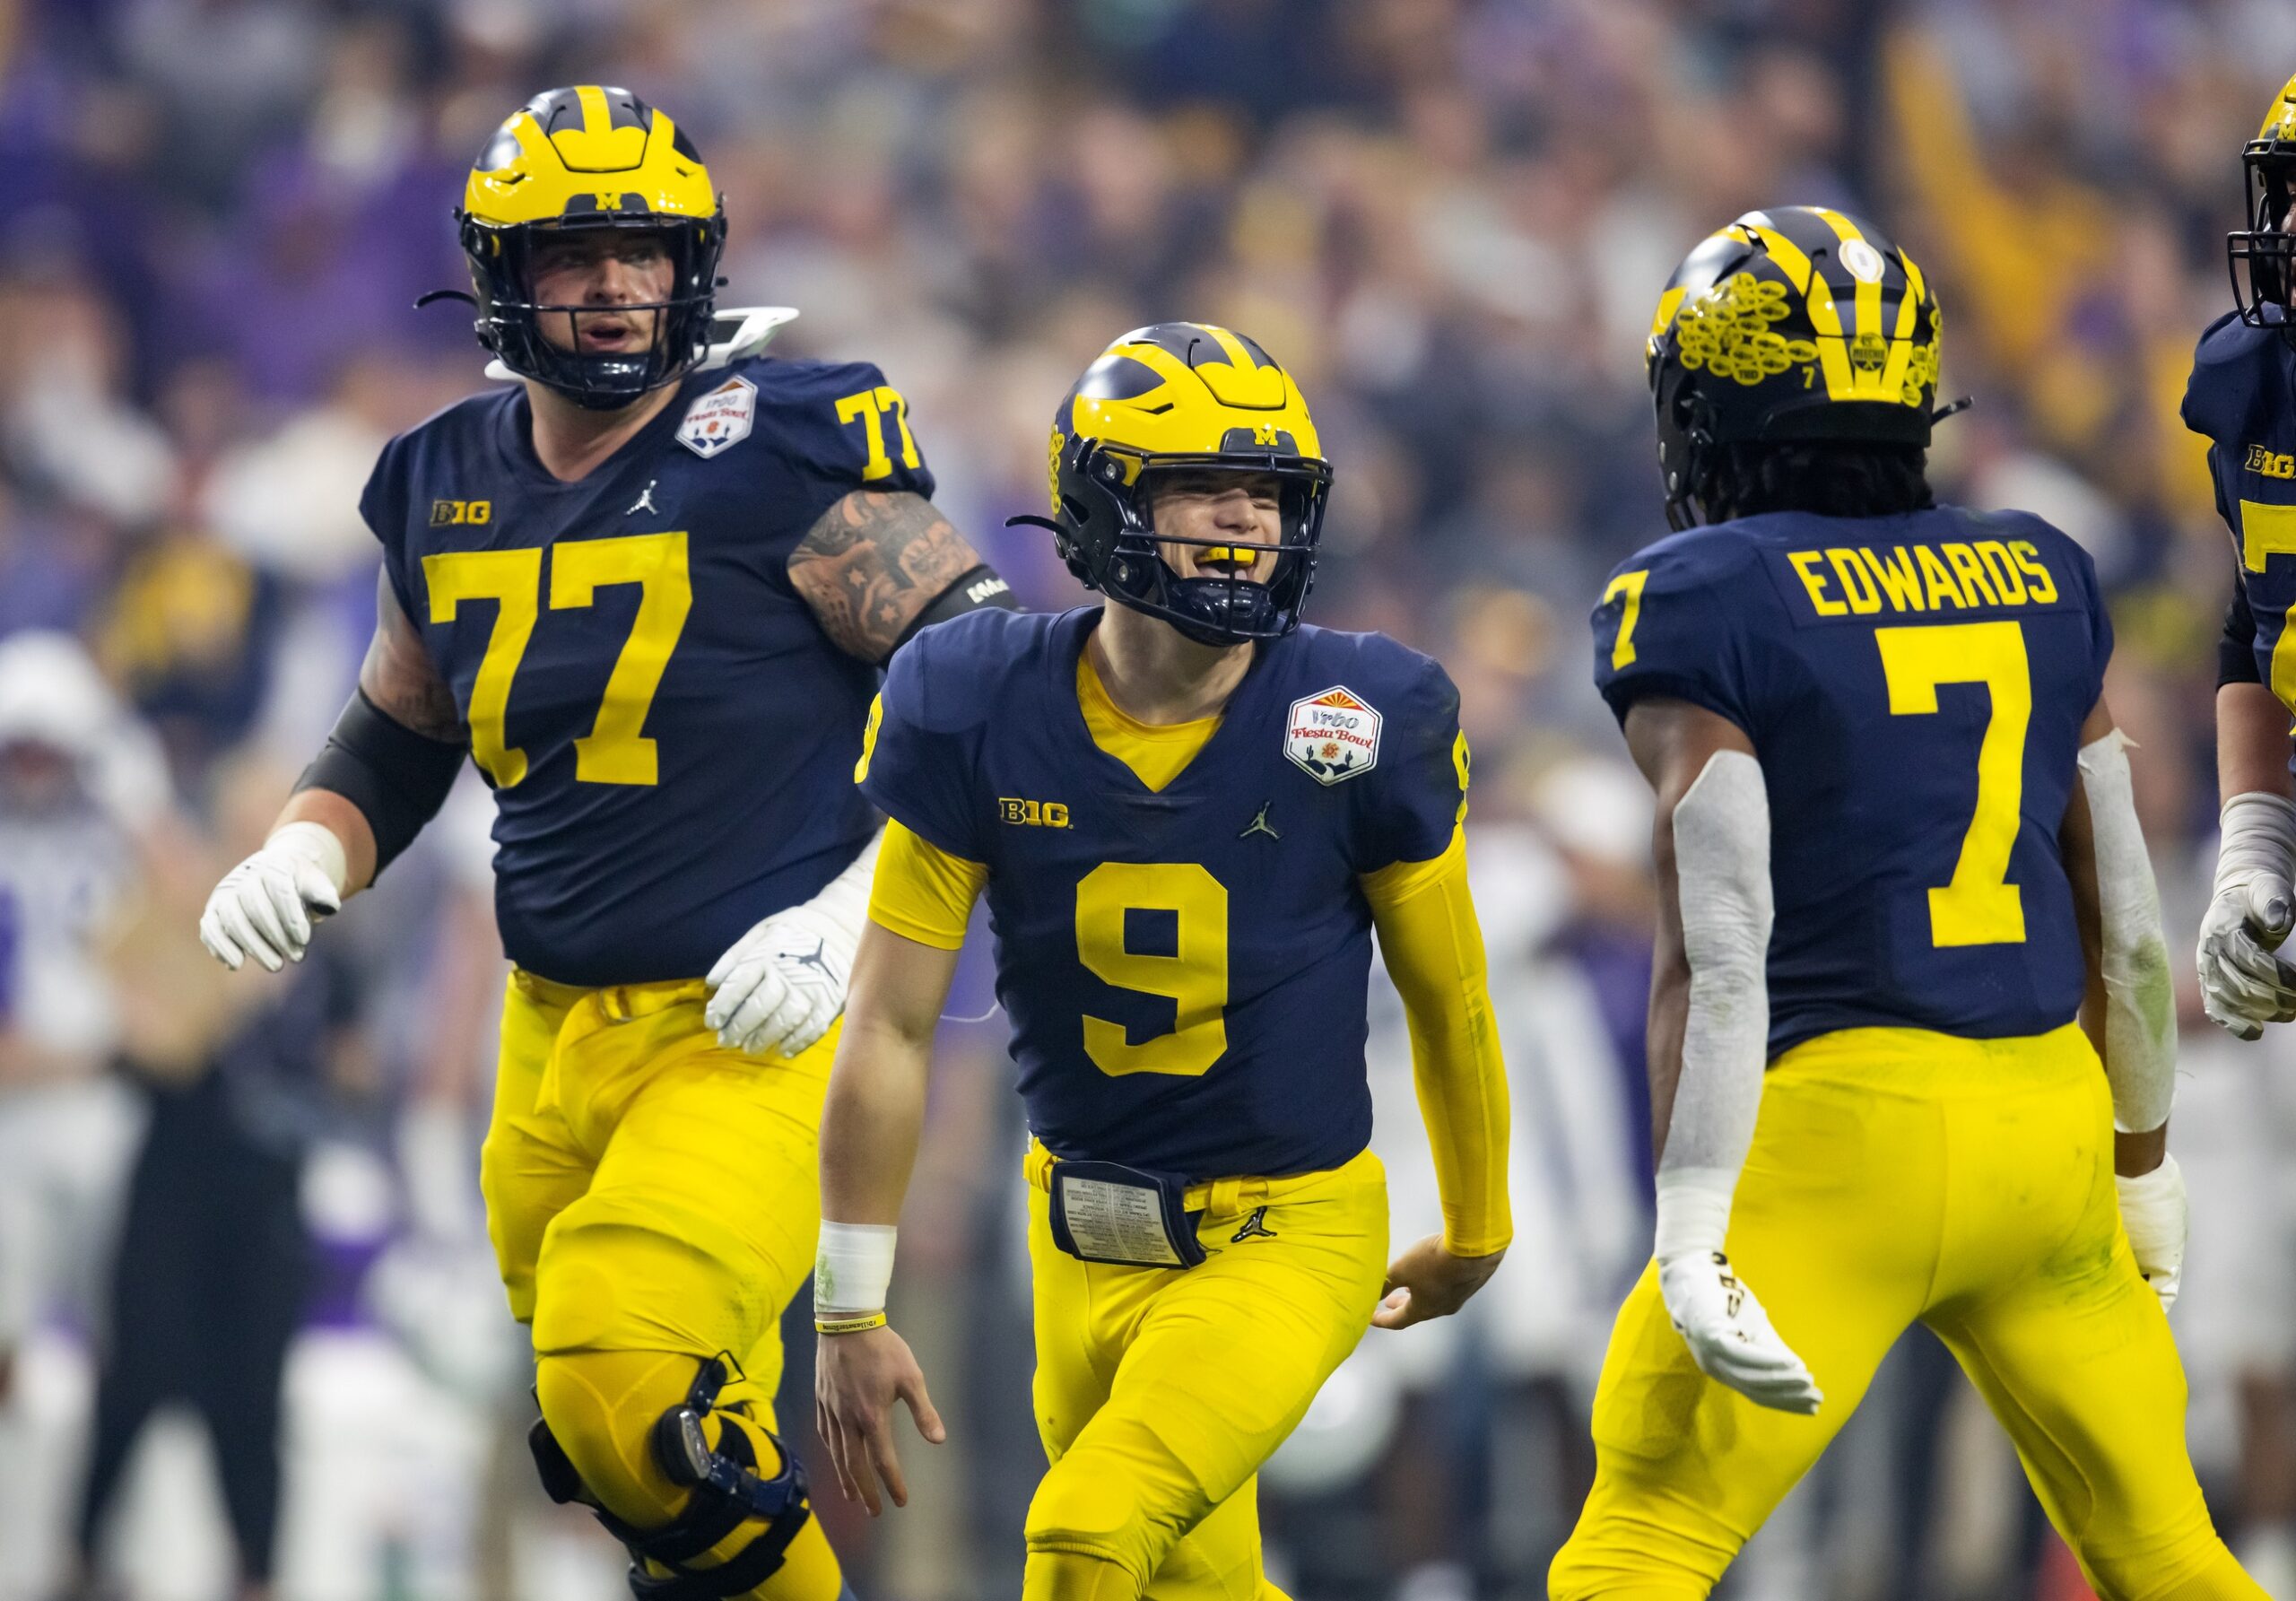 Michigan Wolverines Preview: Roster, Prospects, Schedule, and More